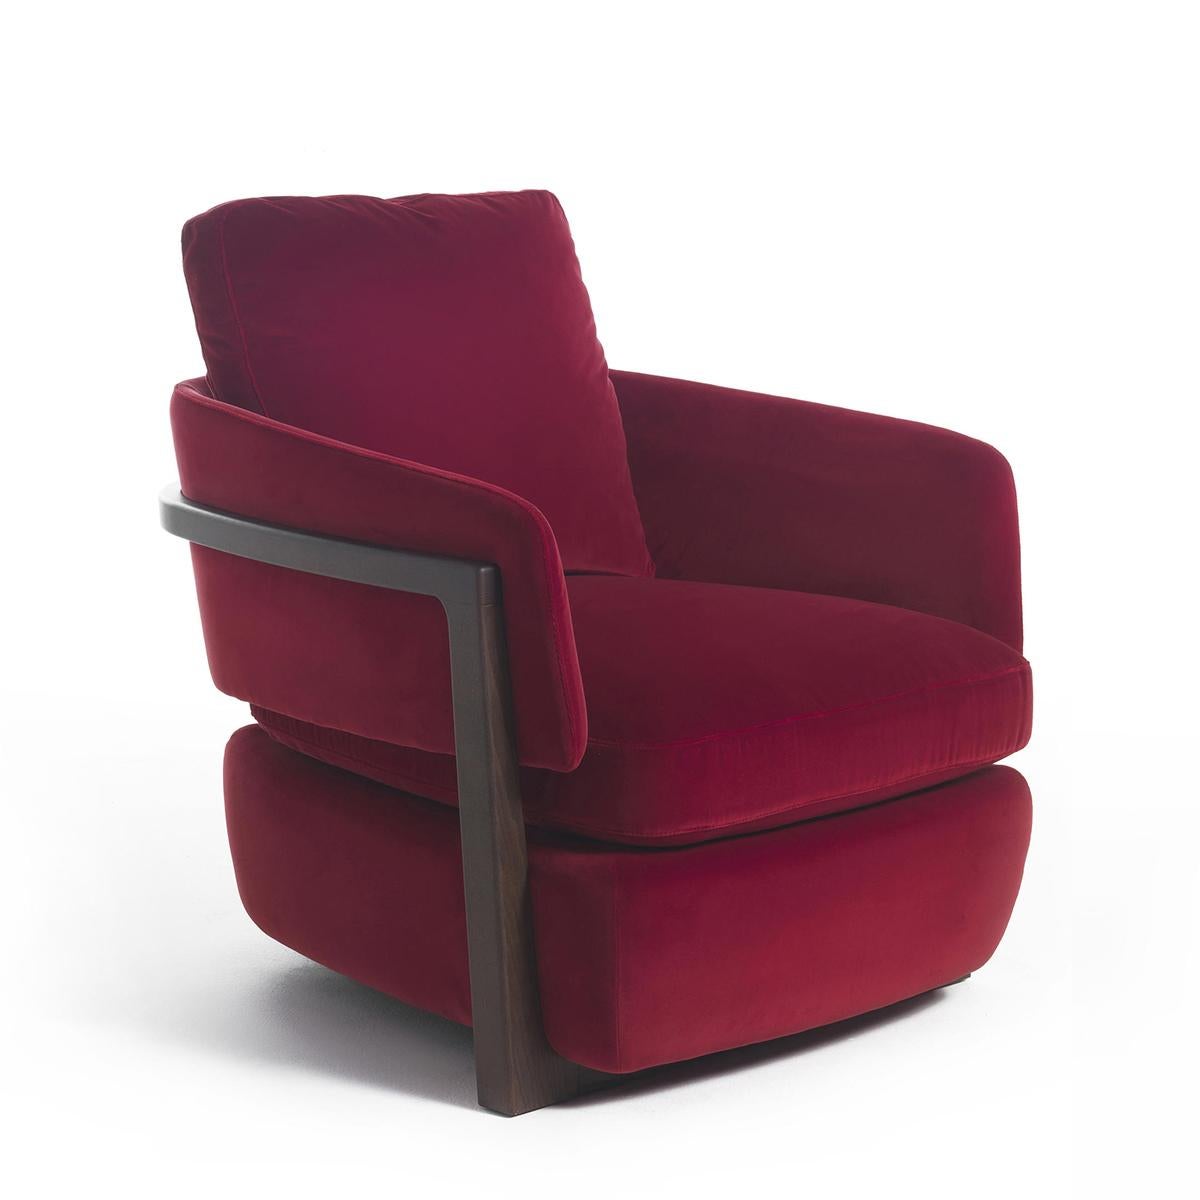 Armchair Kuda with structure in solid walnut 
wood in polished and matte varnished finish.
Upholstered and covered with high quality 
fabric in deep red color.
Also available with other fabrics on request.
 